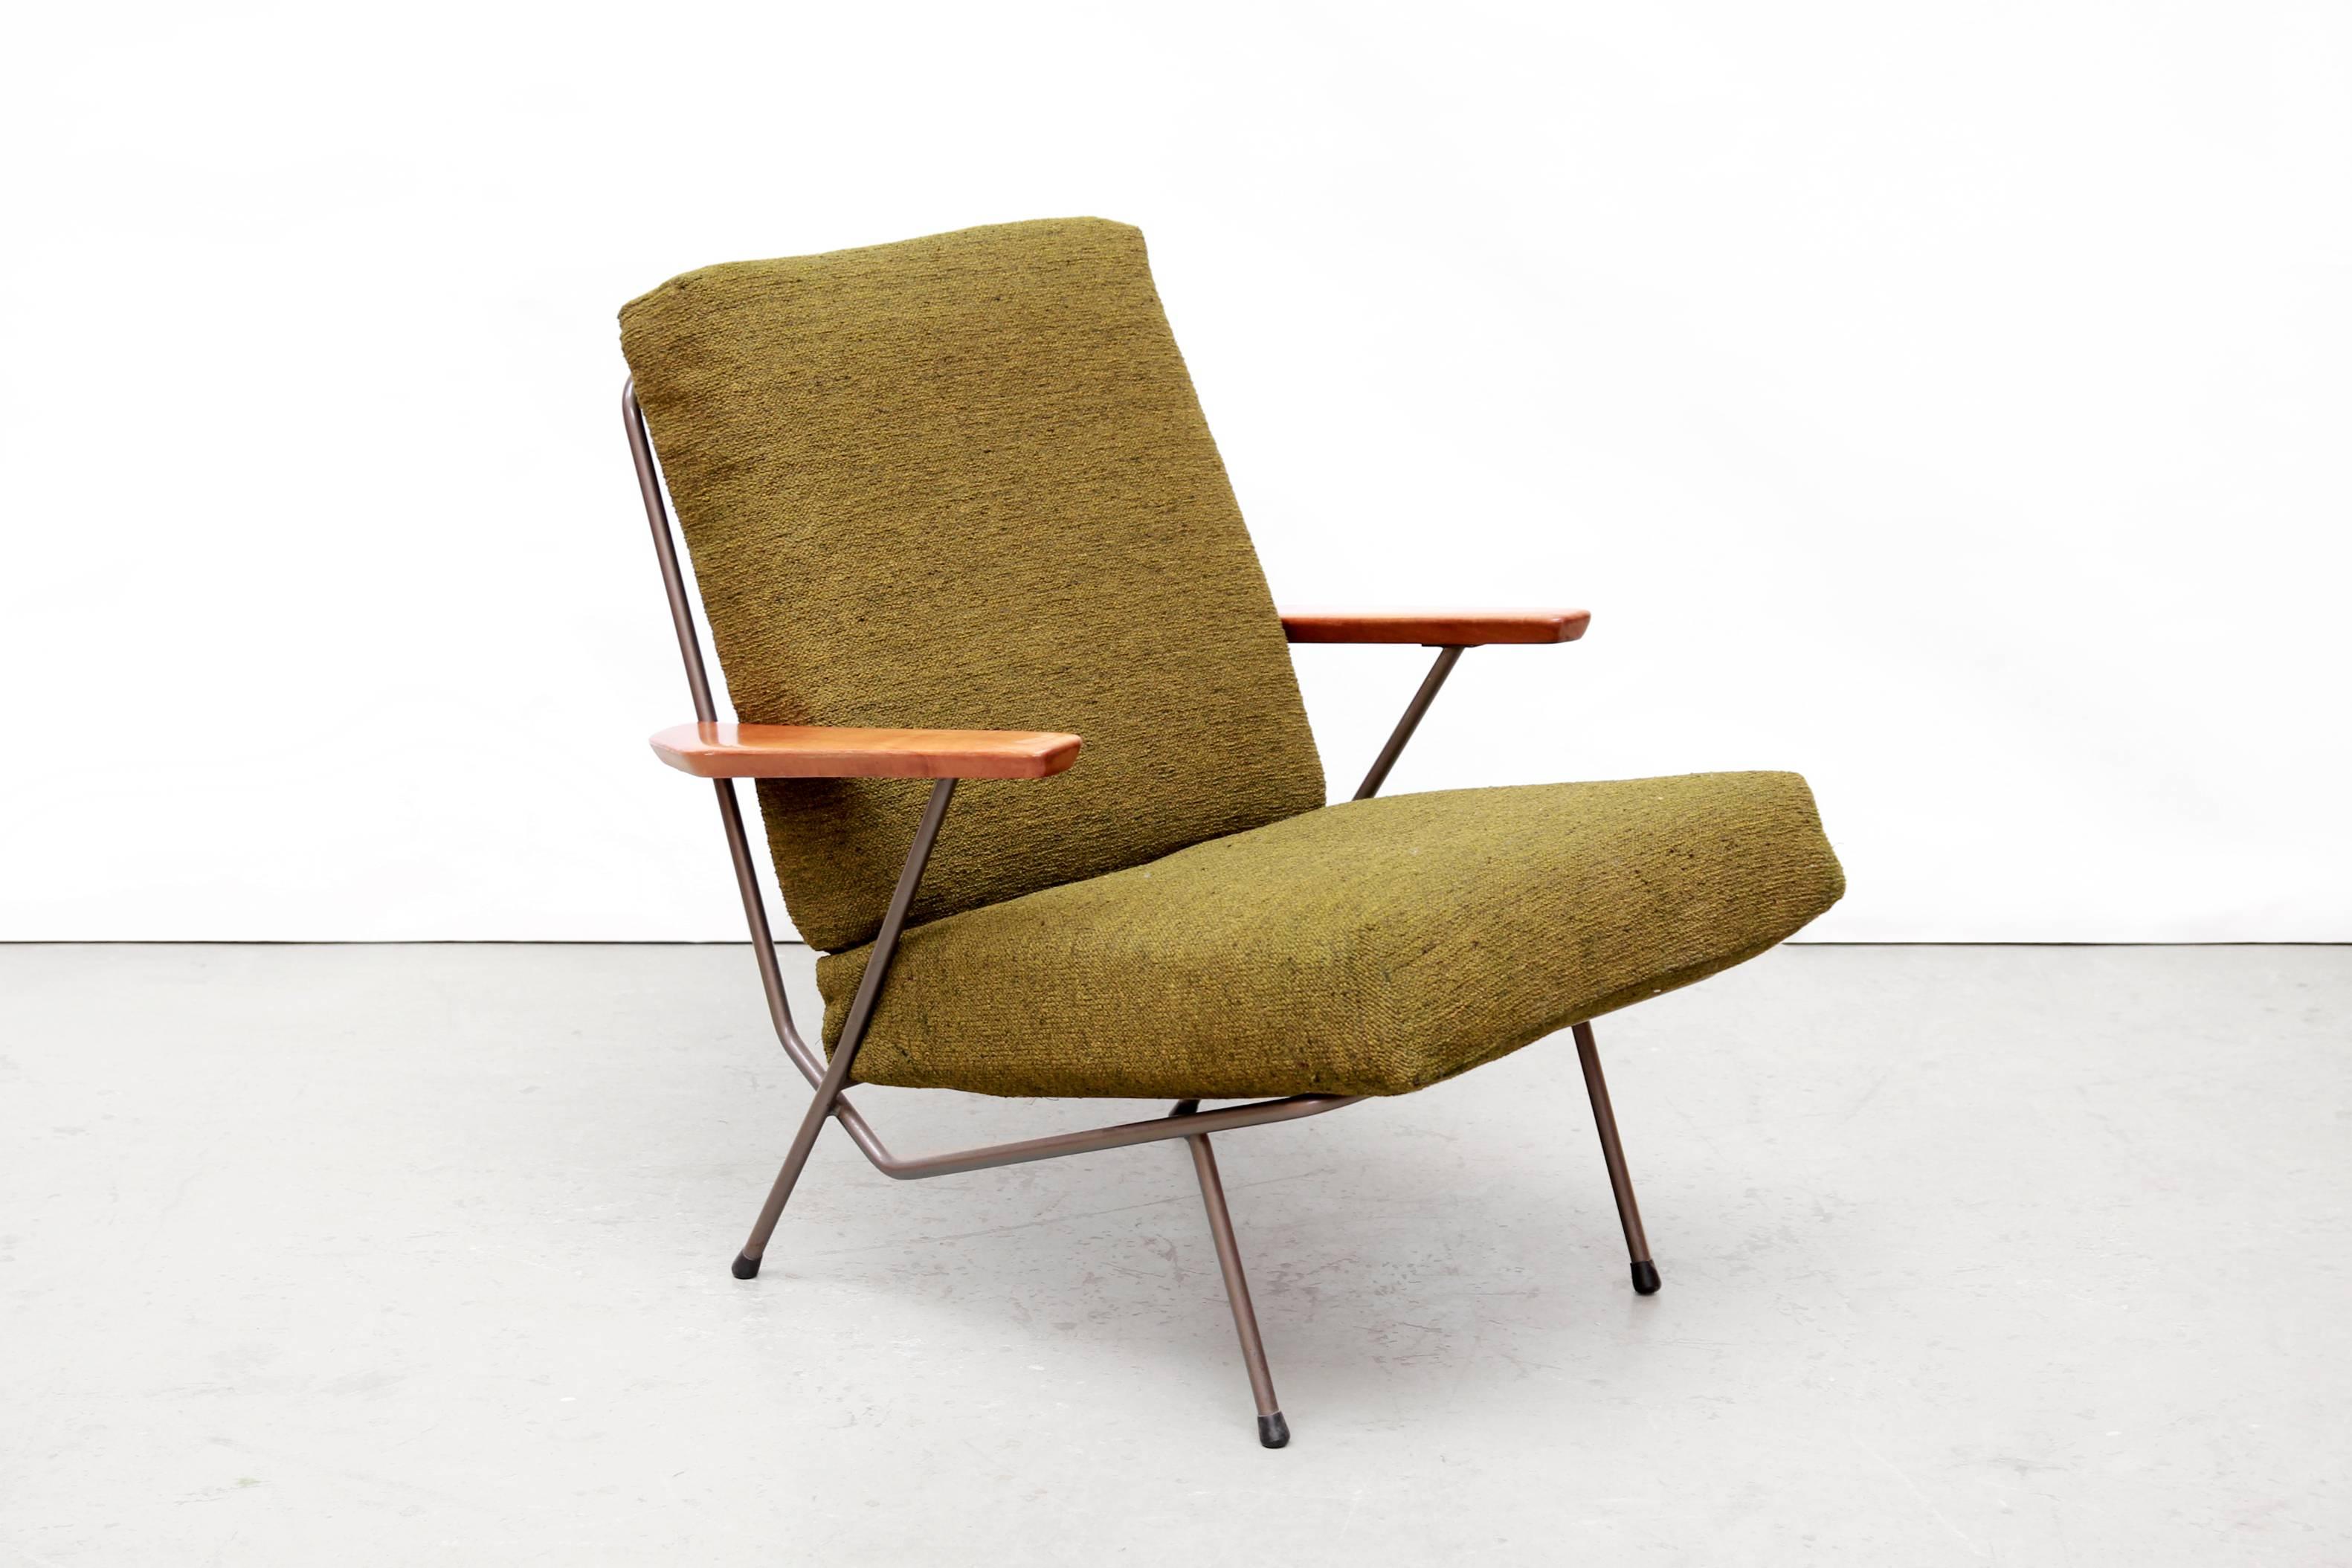 This Dutch design armchair was designed by Koene Oberman for Gelderland, the Netherlands around 1954. This Minimalist design with metal frame, wooden armrests and green upholstered spring pillows is an original early vintage edition with minimal